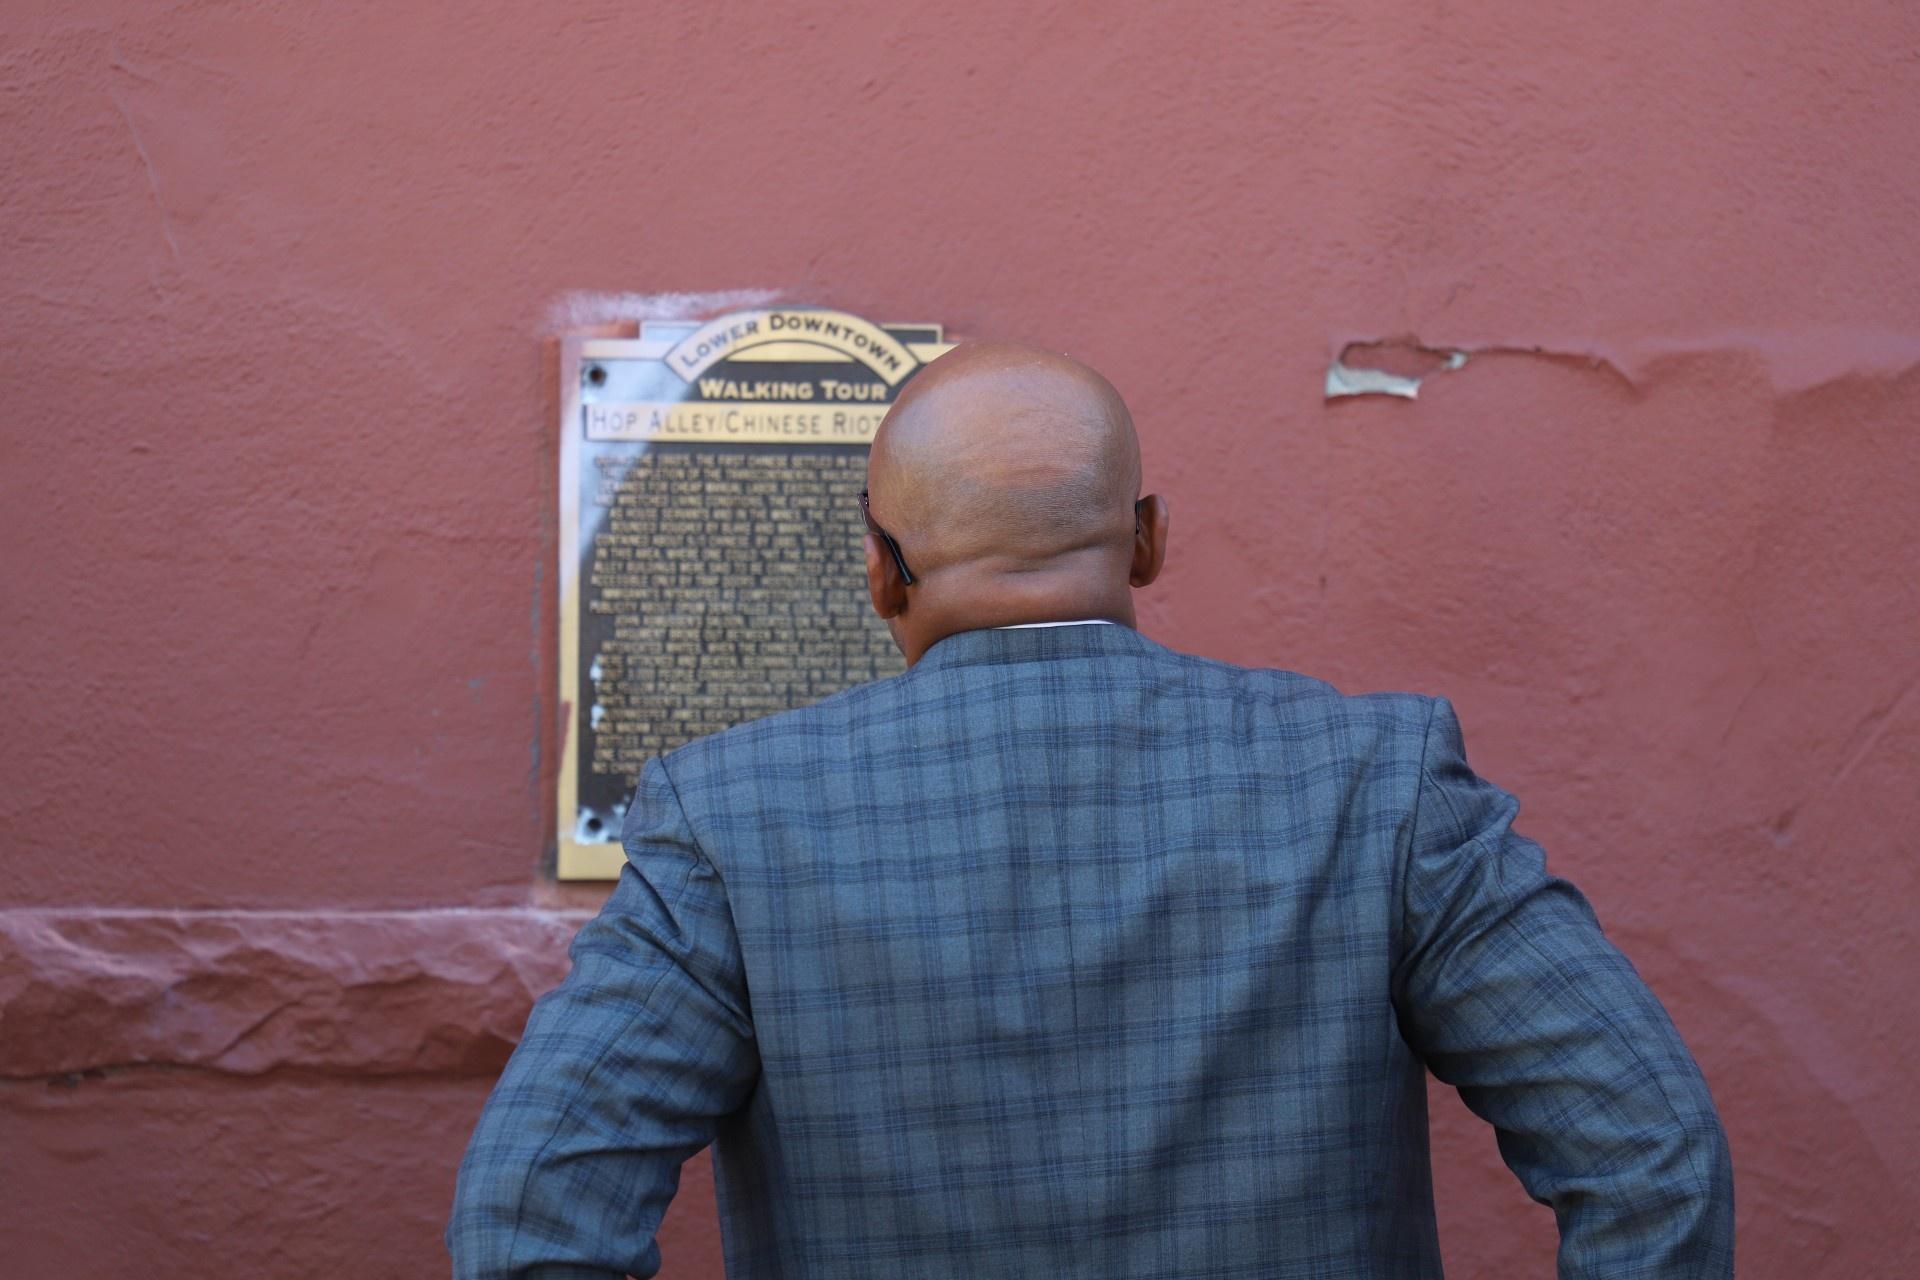 Denver Mayor Michael B. Hancock reads the plaque before it was taken down Monday, August 8, 2022.